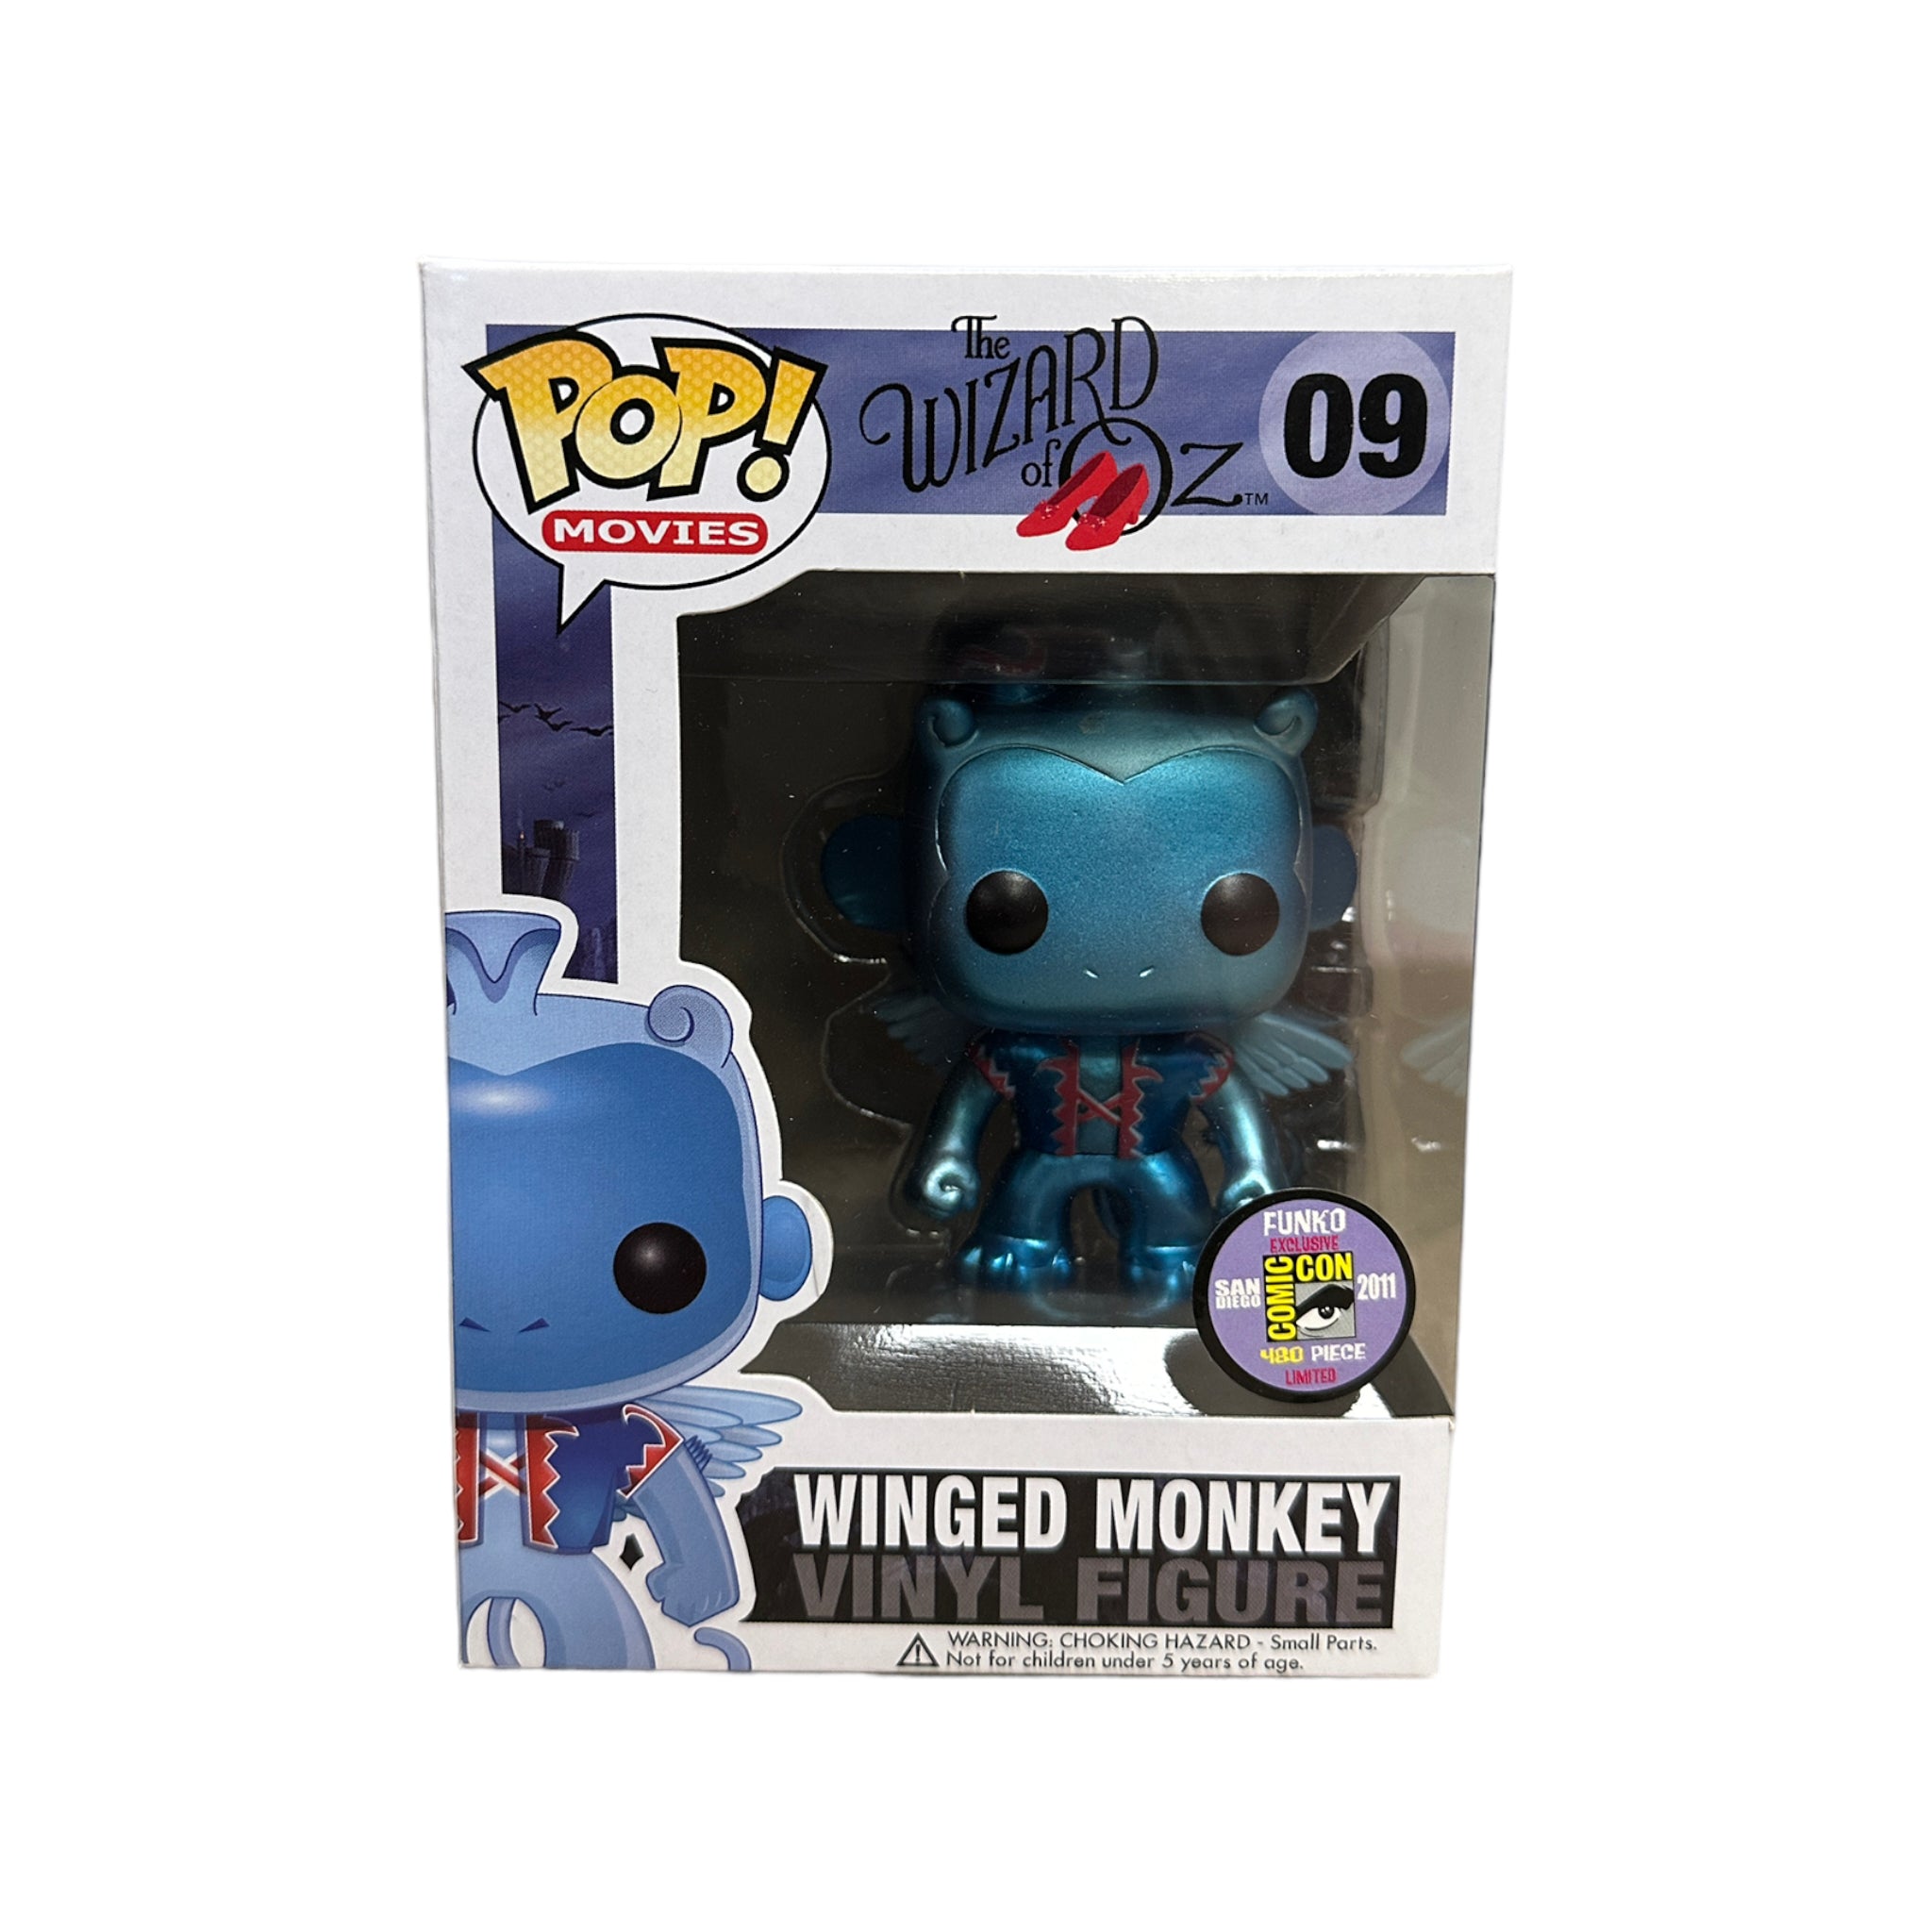 Winged Monkey #09 (Metallic) Funko Pop! - The Wizard of Oz - SDCC 2011 Exclusive LE480 Pcs - Condition 8.75/10